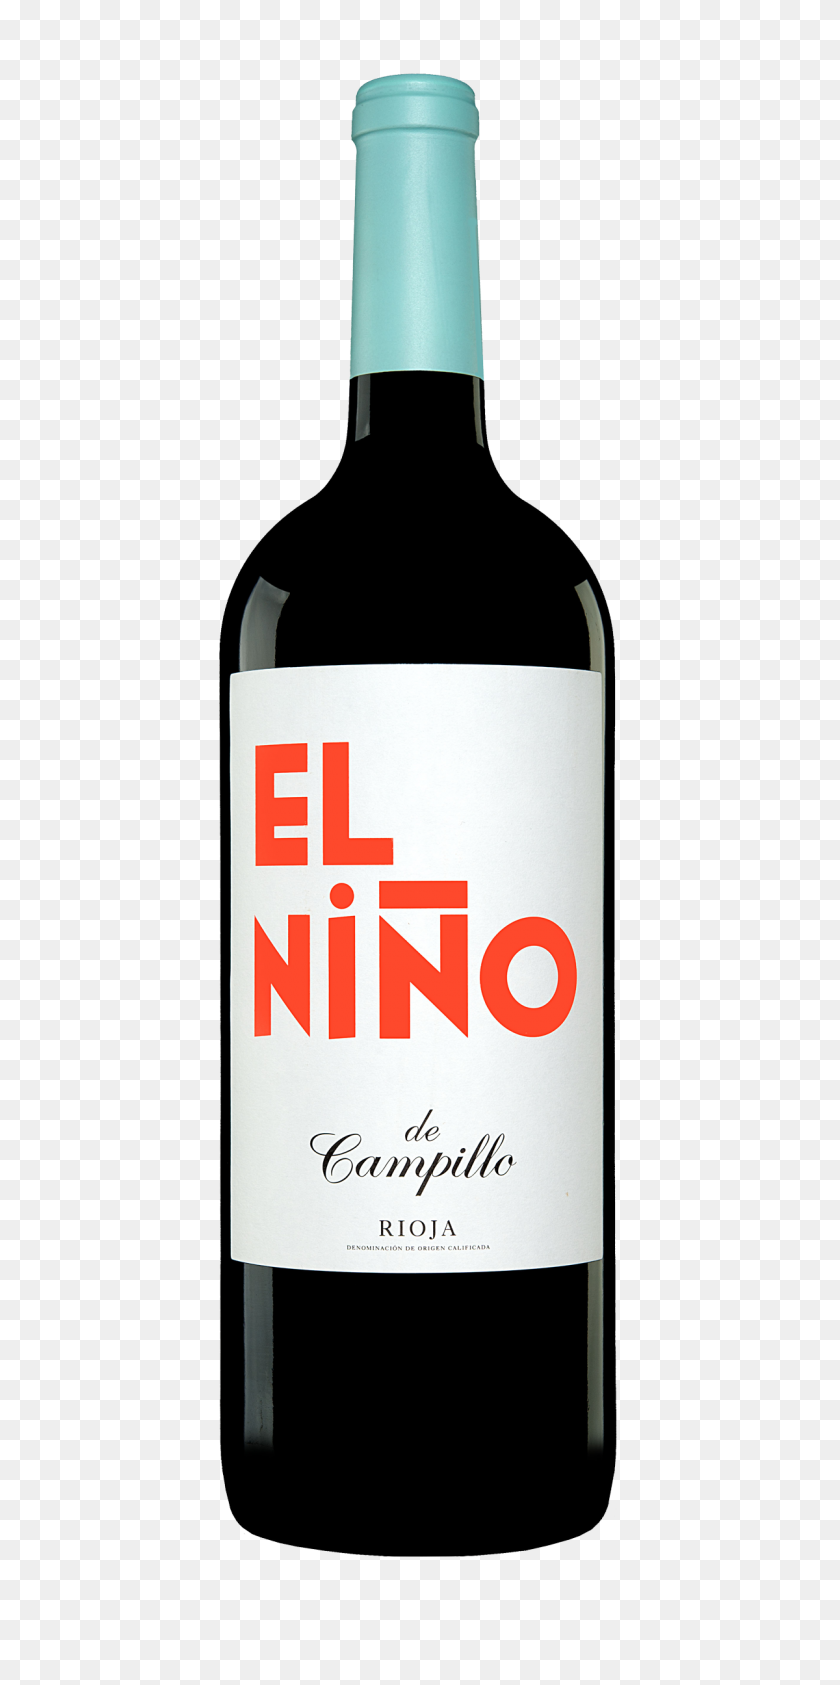 1200x2500 Elninodecampillo Desembarco, Spanish Wine - Alcohol Bottle PNG